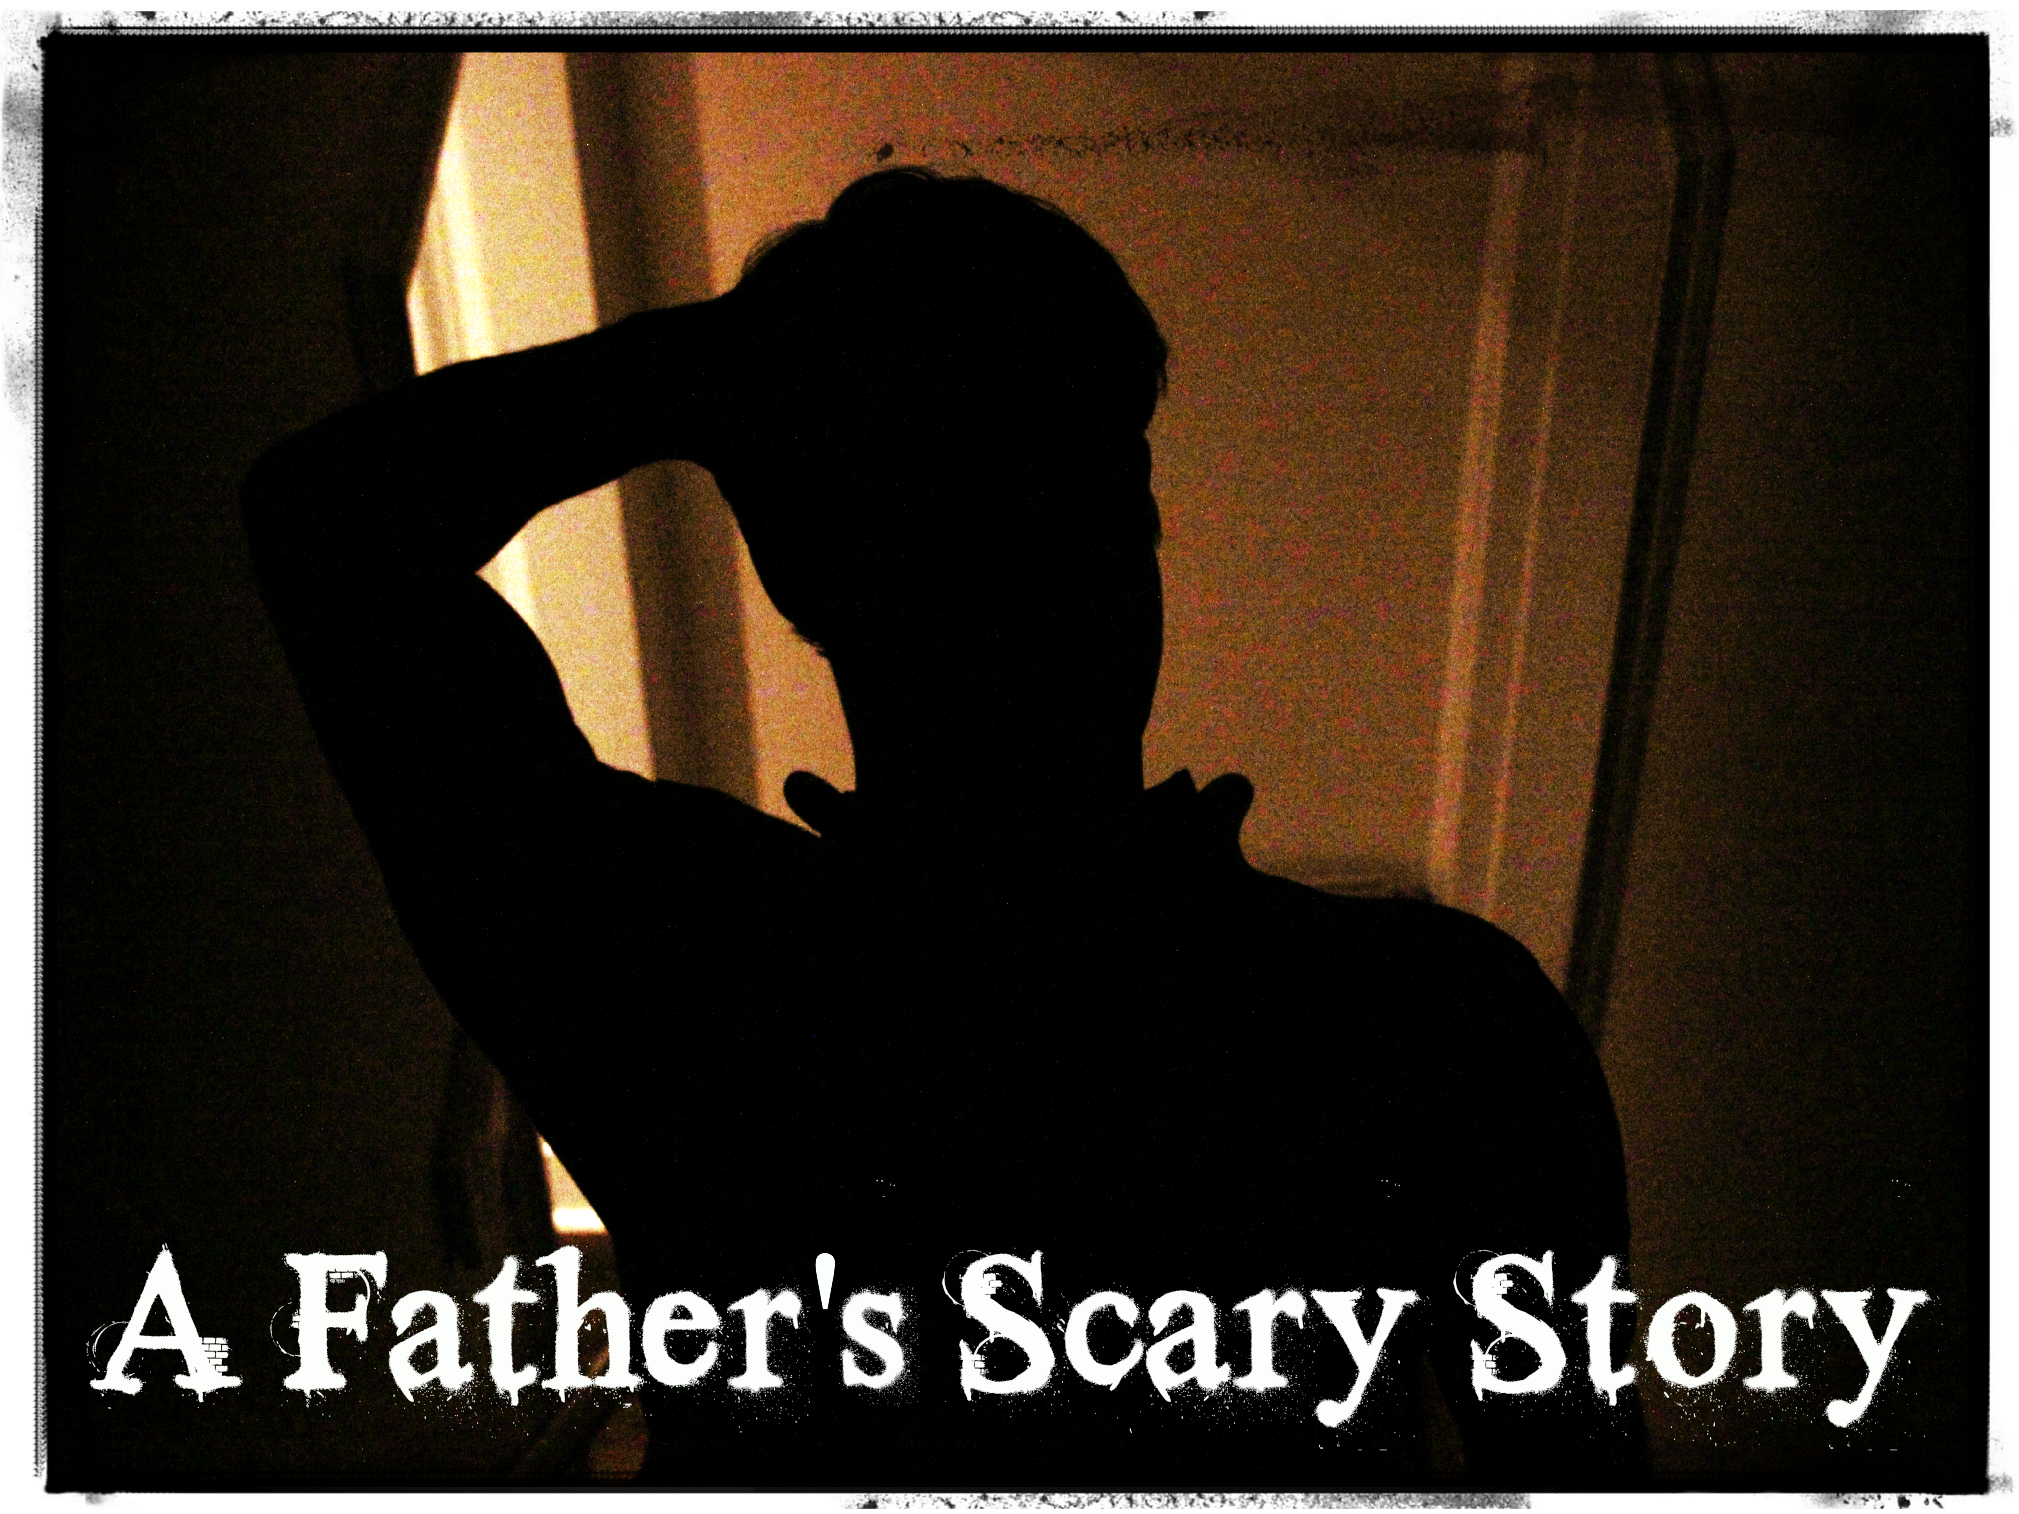 A Father's Scary Story